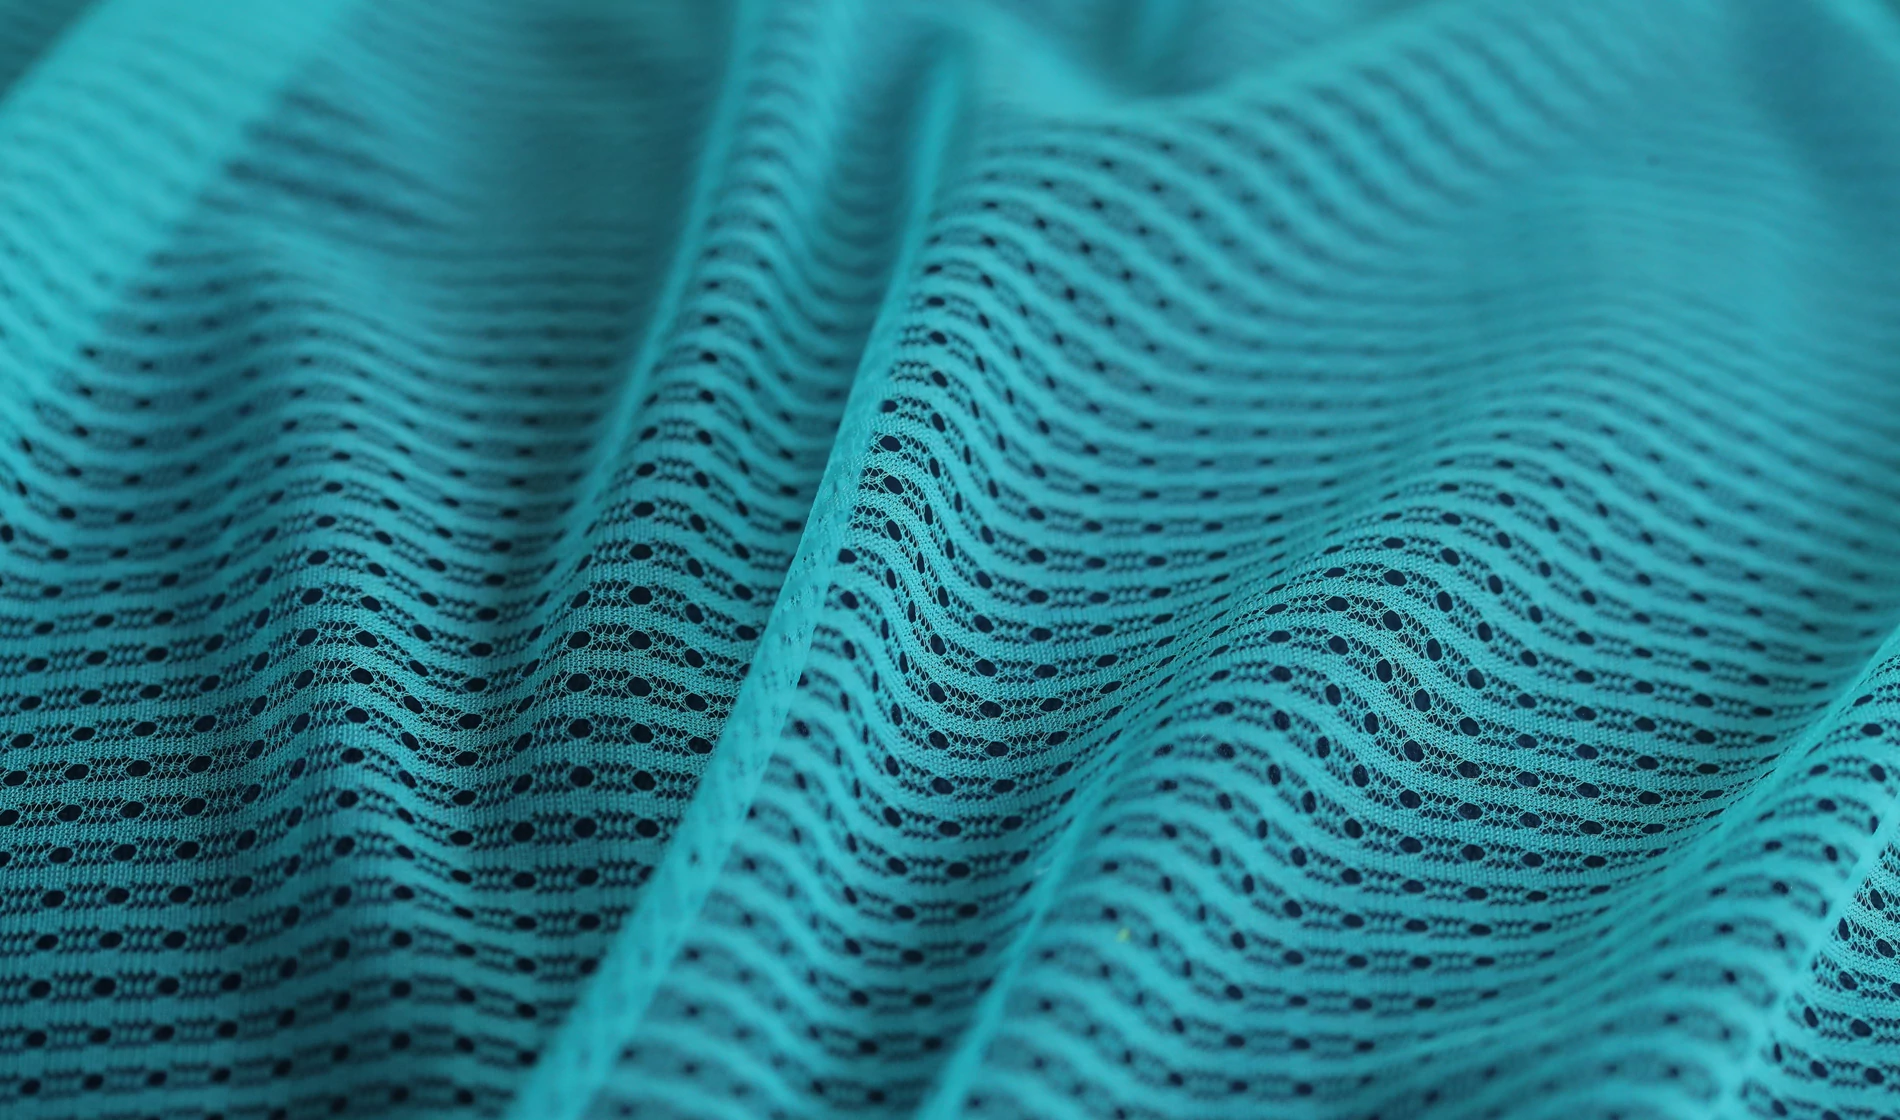 Warp knitted fabric variety collection - patternvip